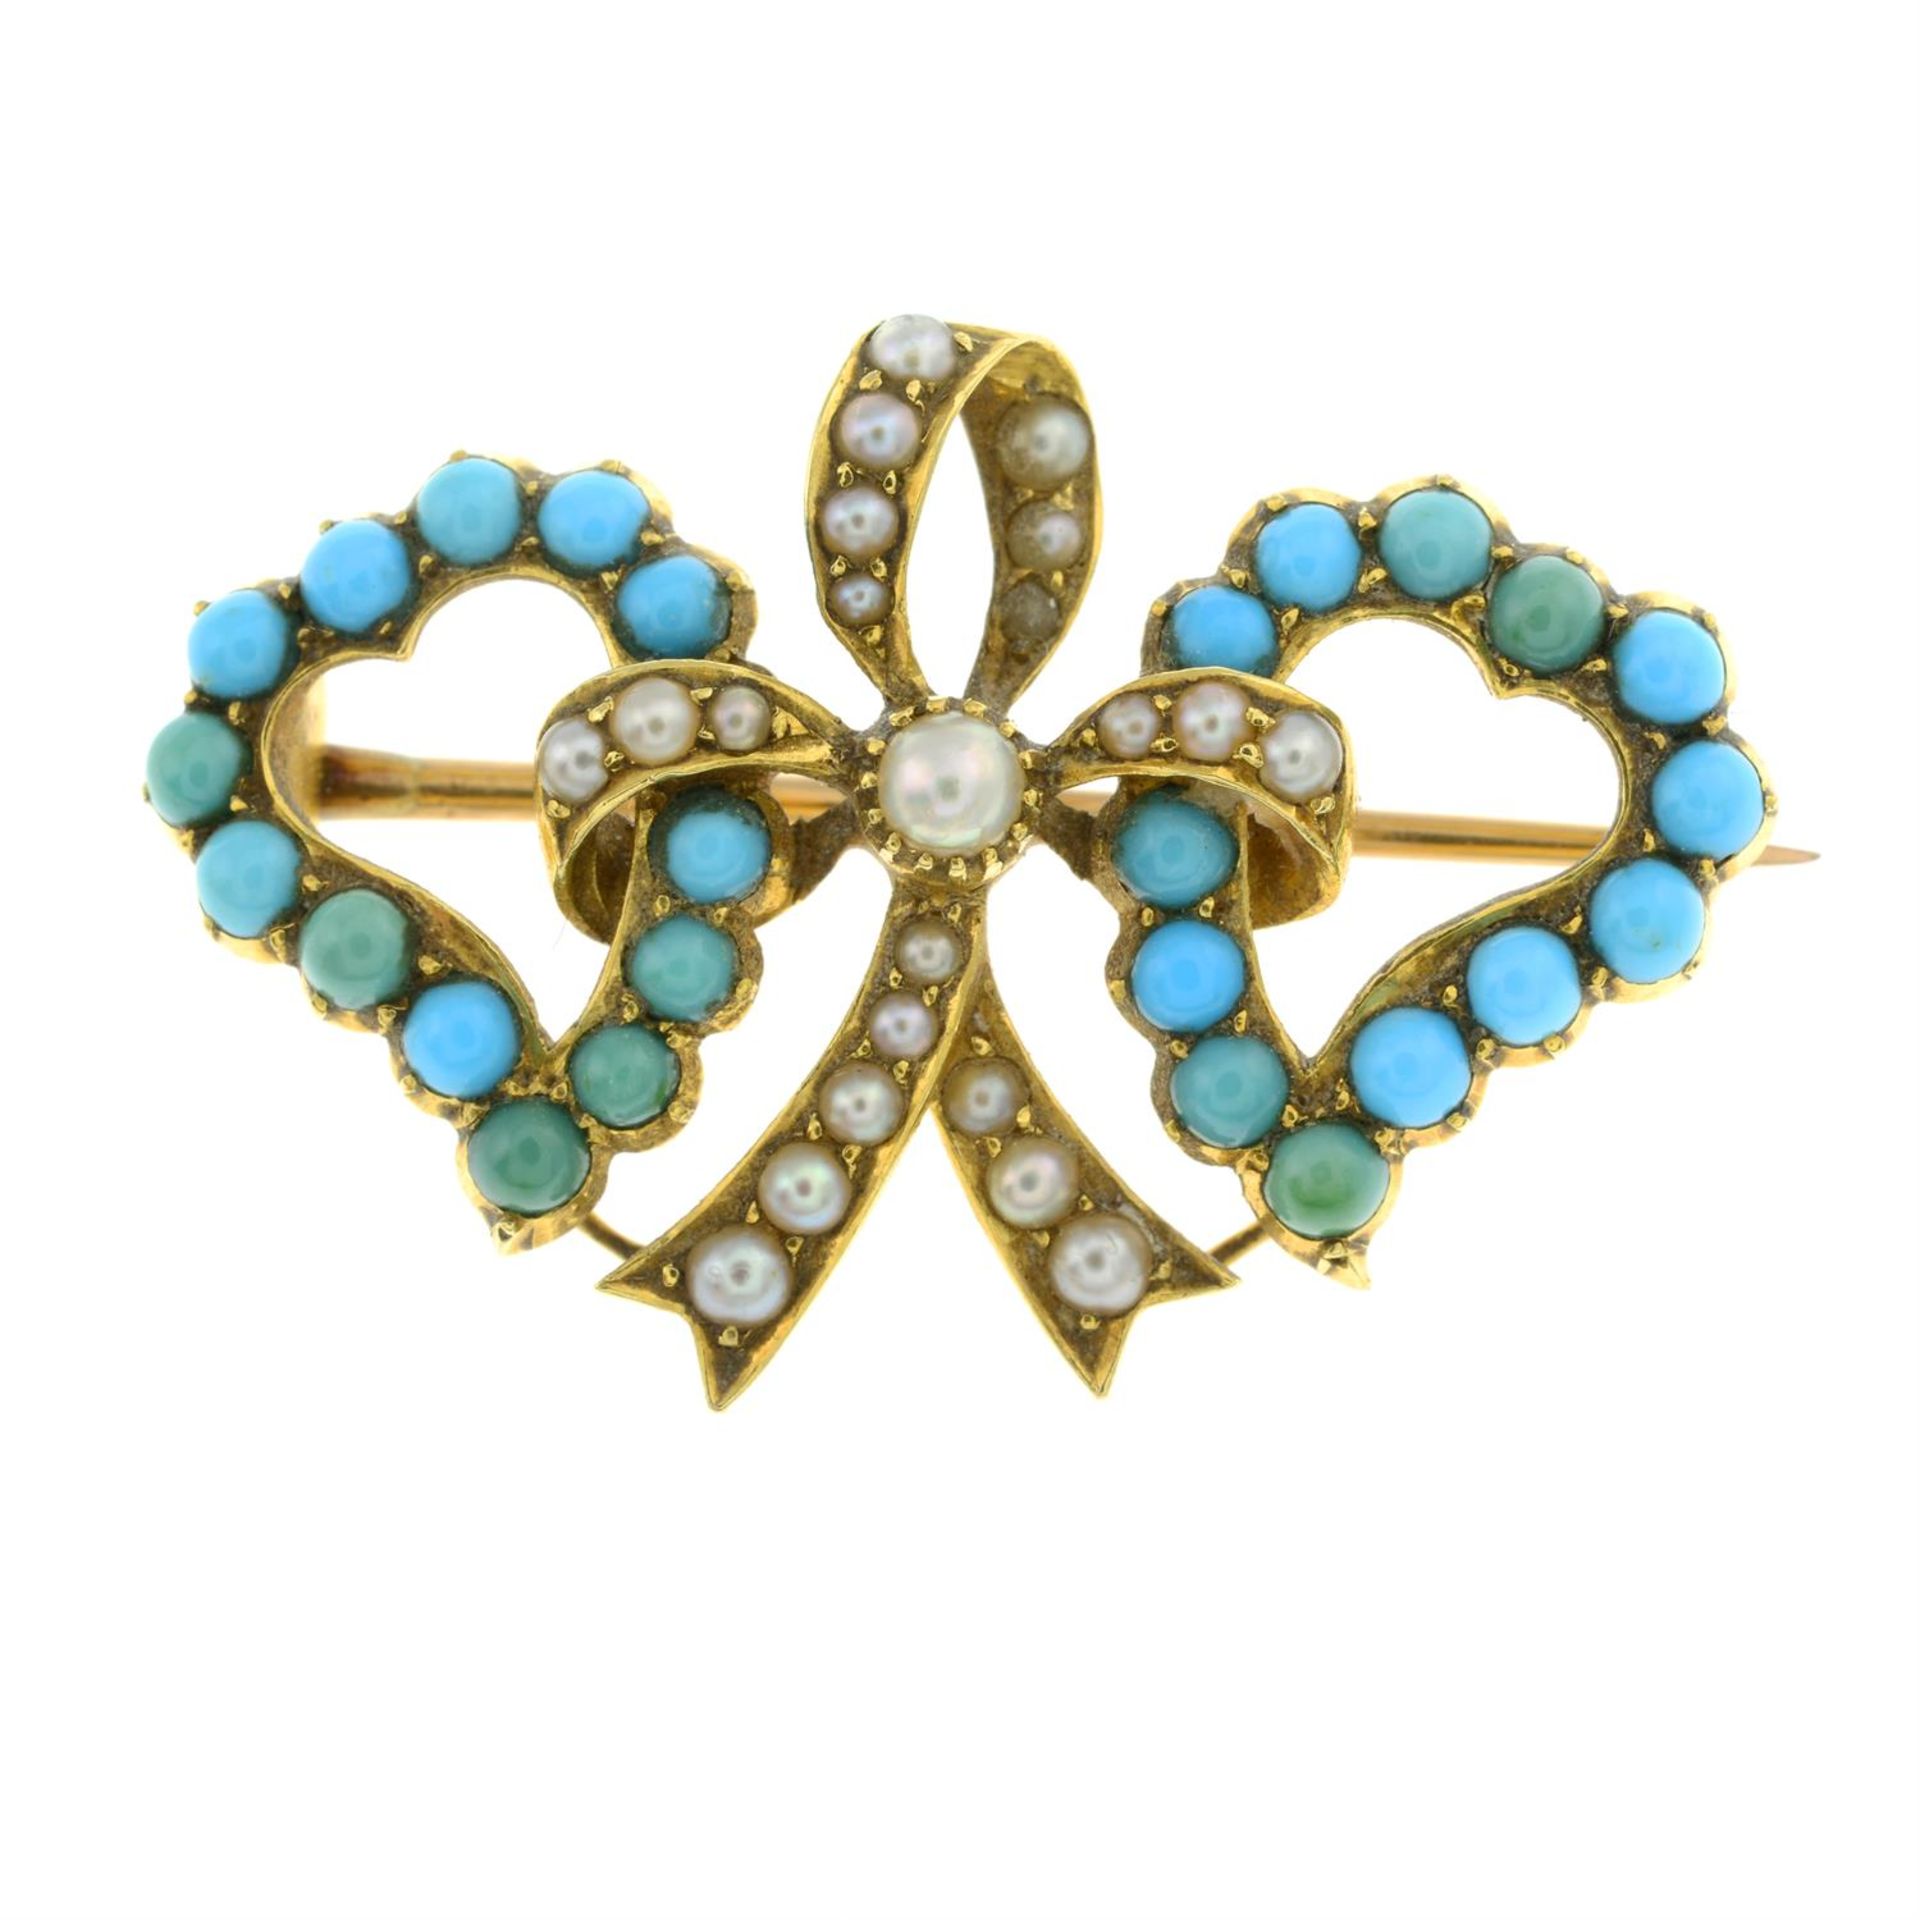 Late 19th century split pearl & turquoise brooch